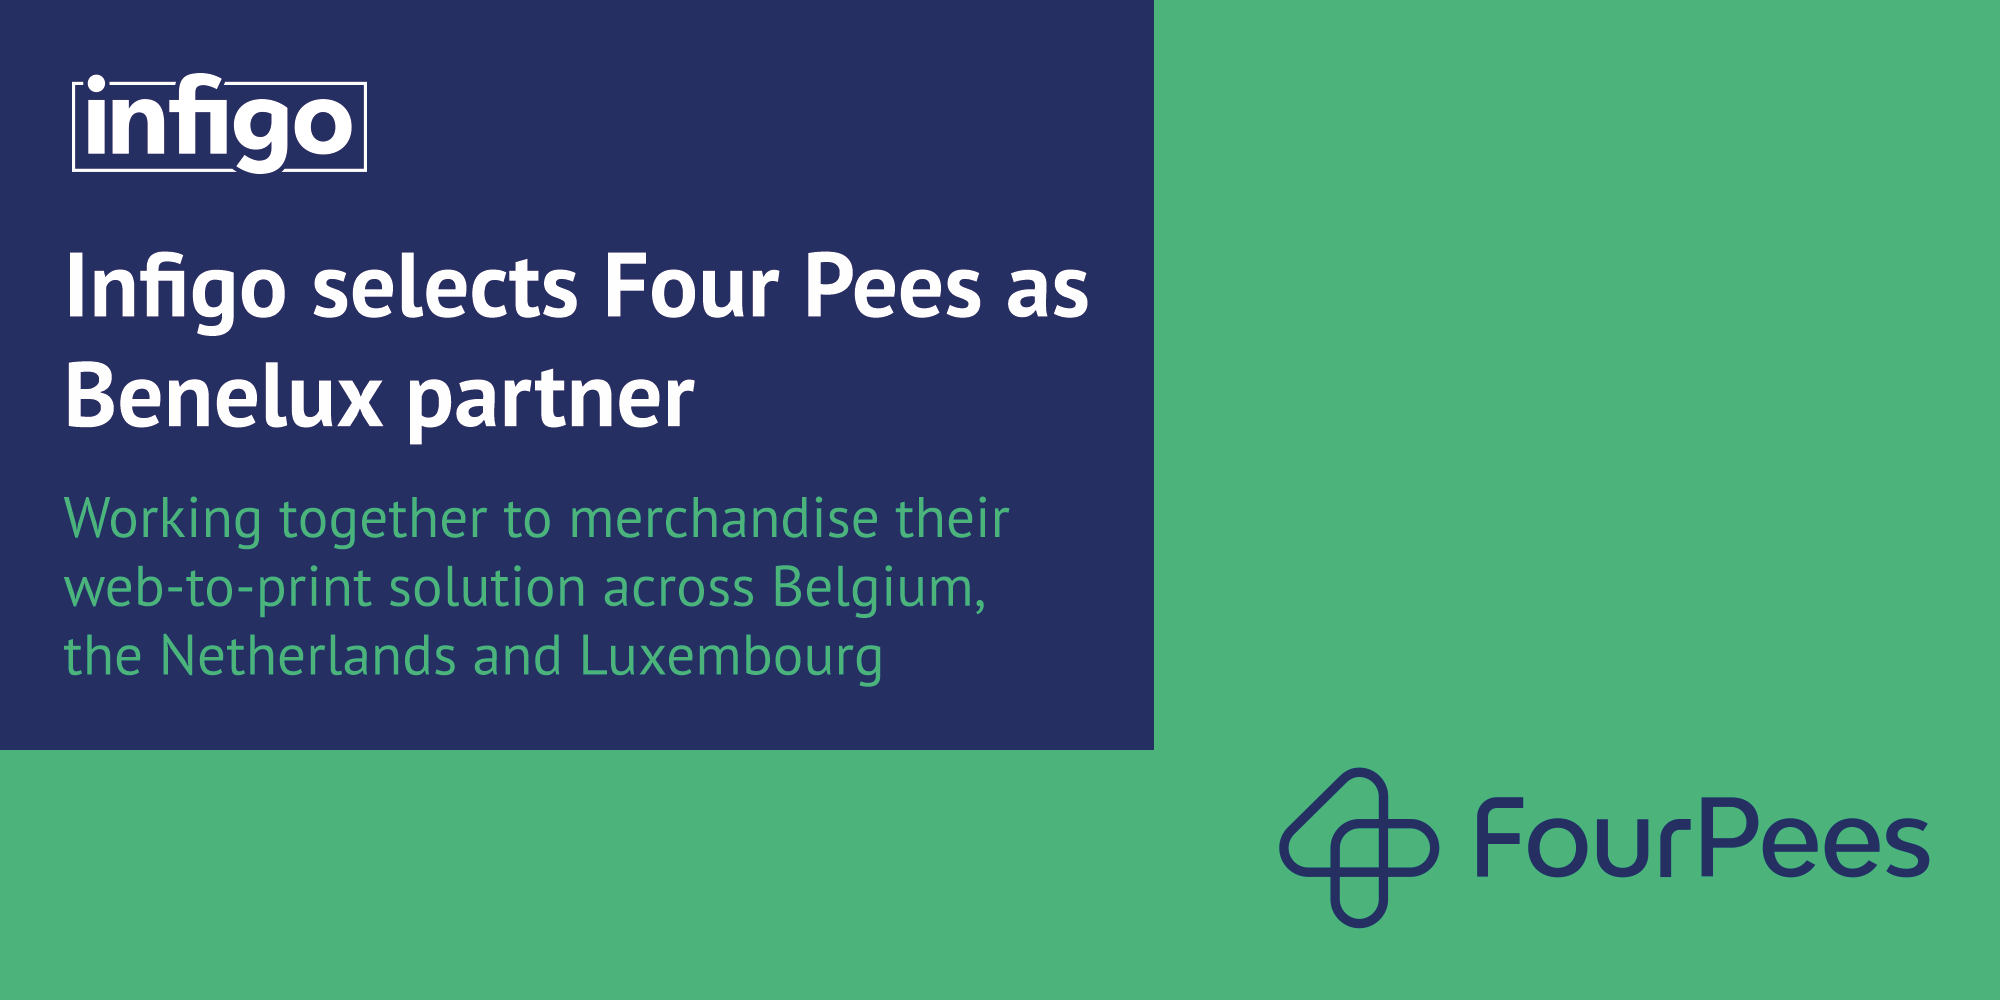 Infigo selects Four Pees as the premiere Benelux partner